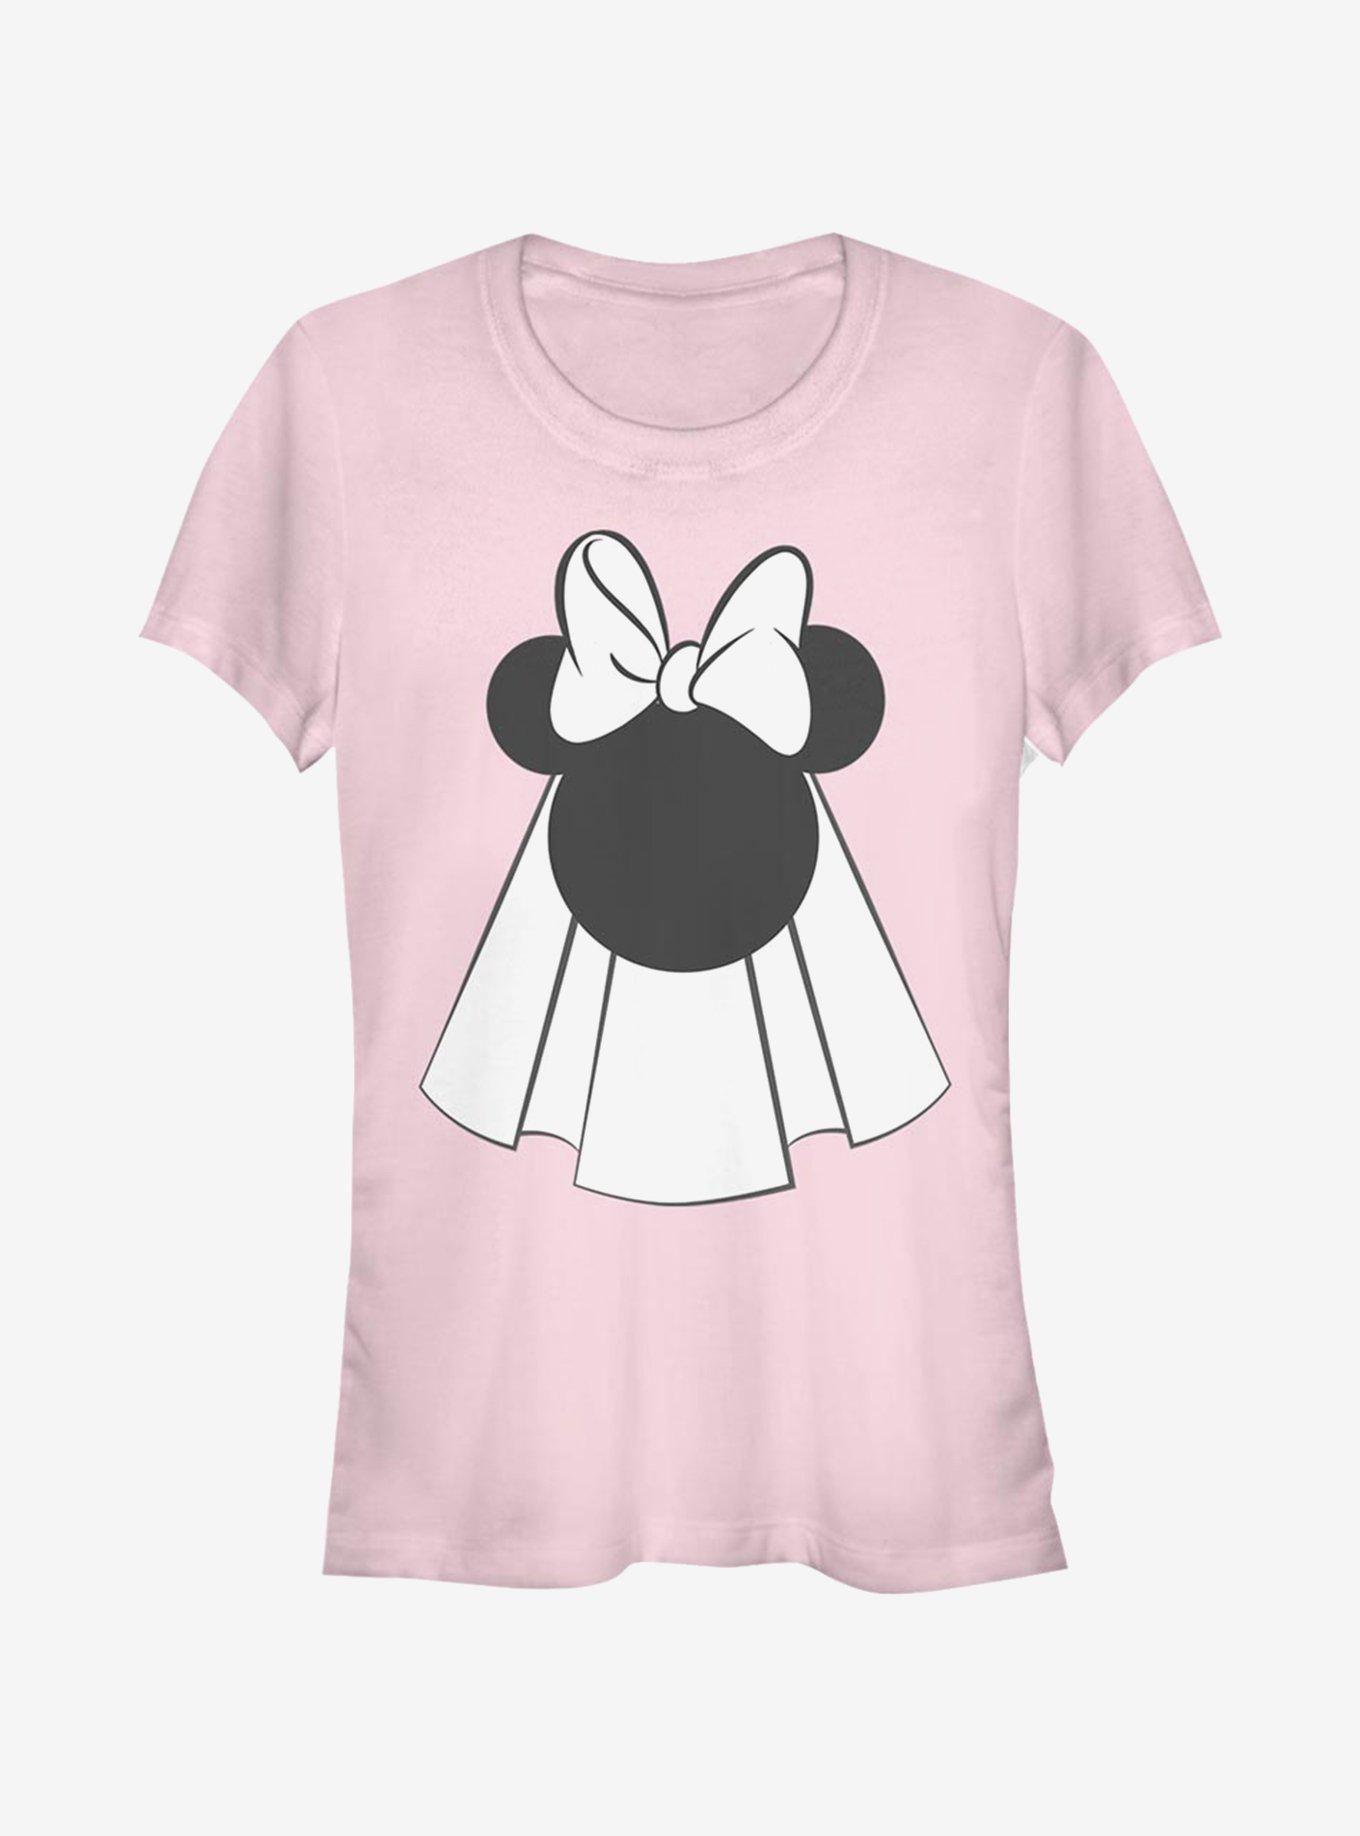 Disney Mickey Mouse Mouse Bride Girls T-Shirt, LIGHT PINK, hi-res